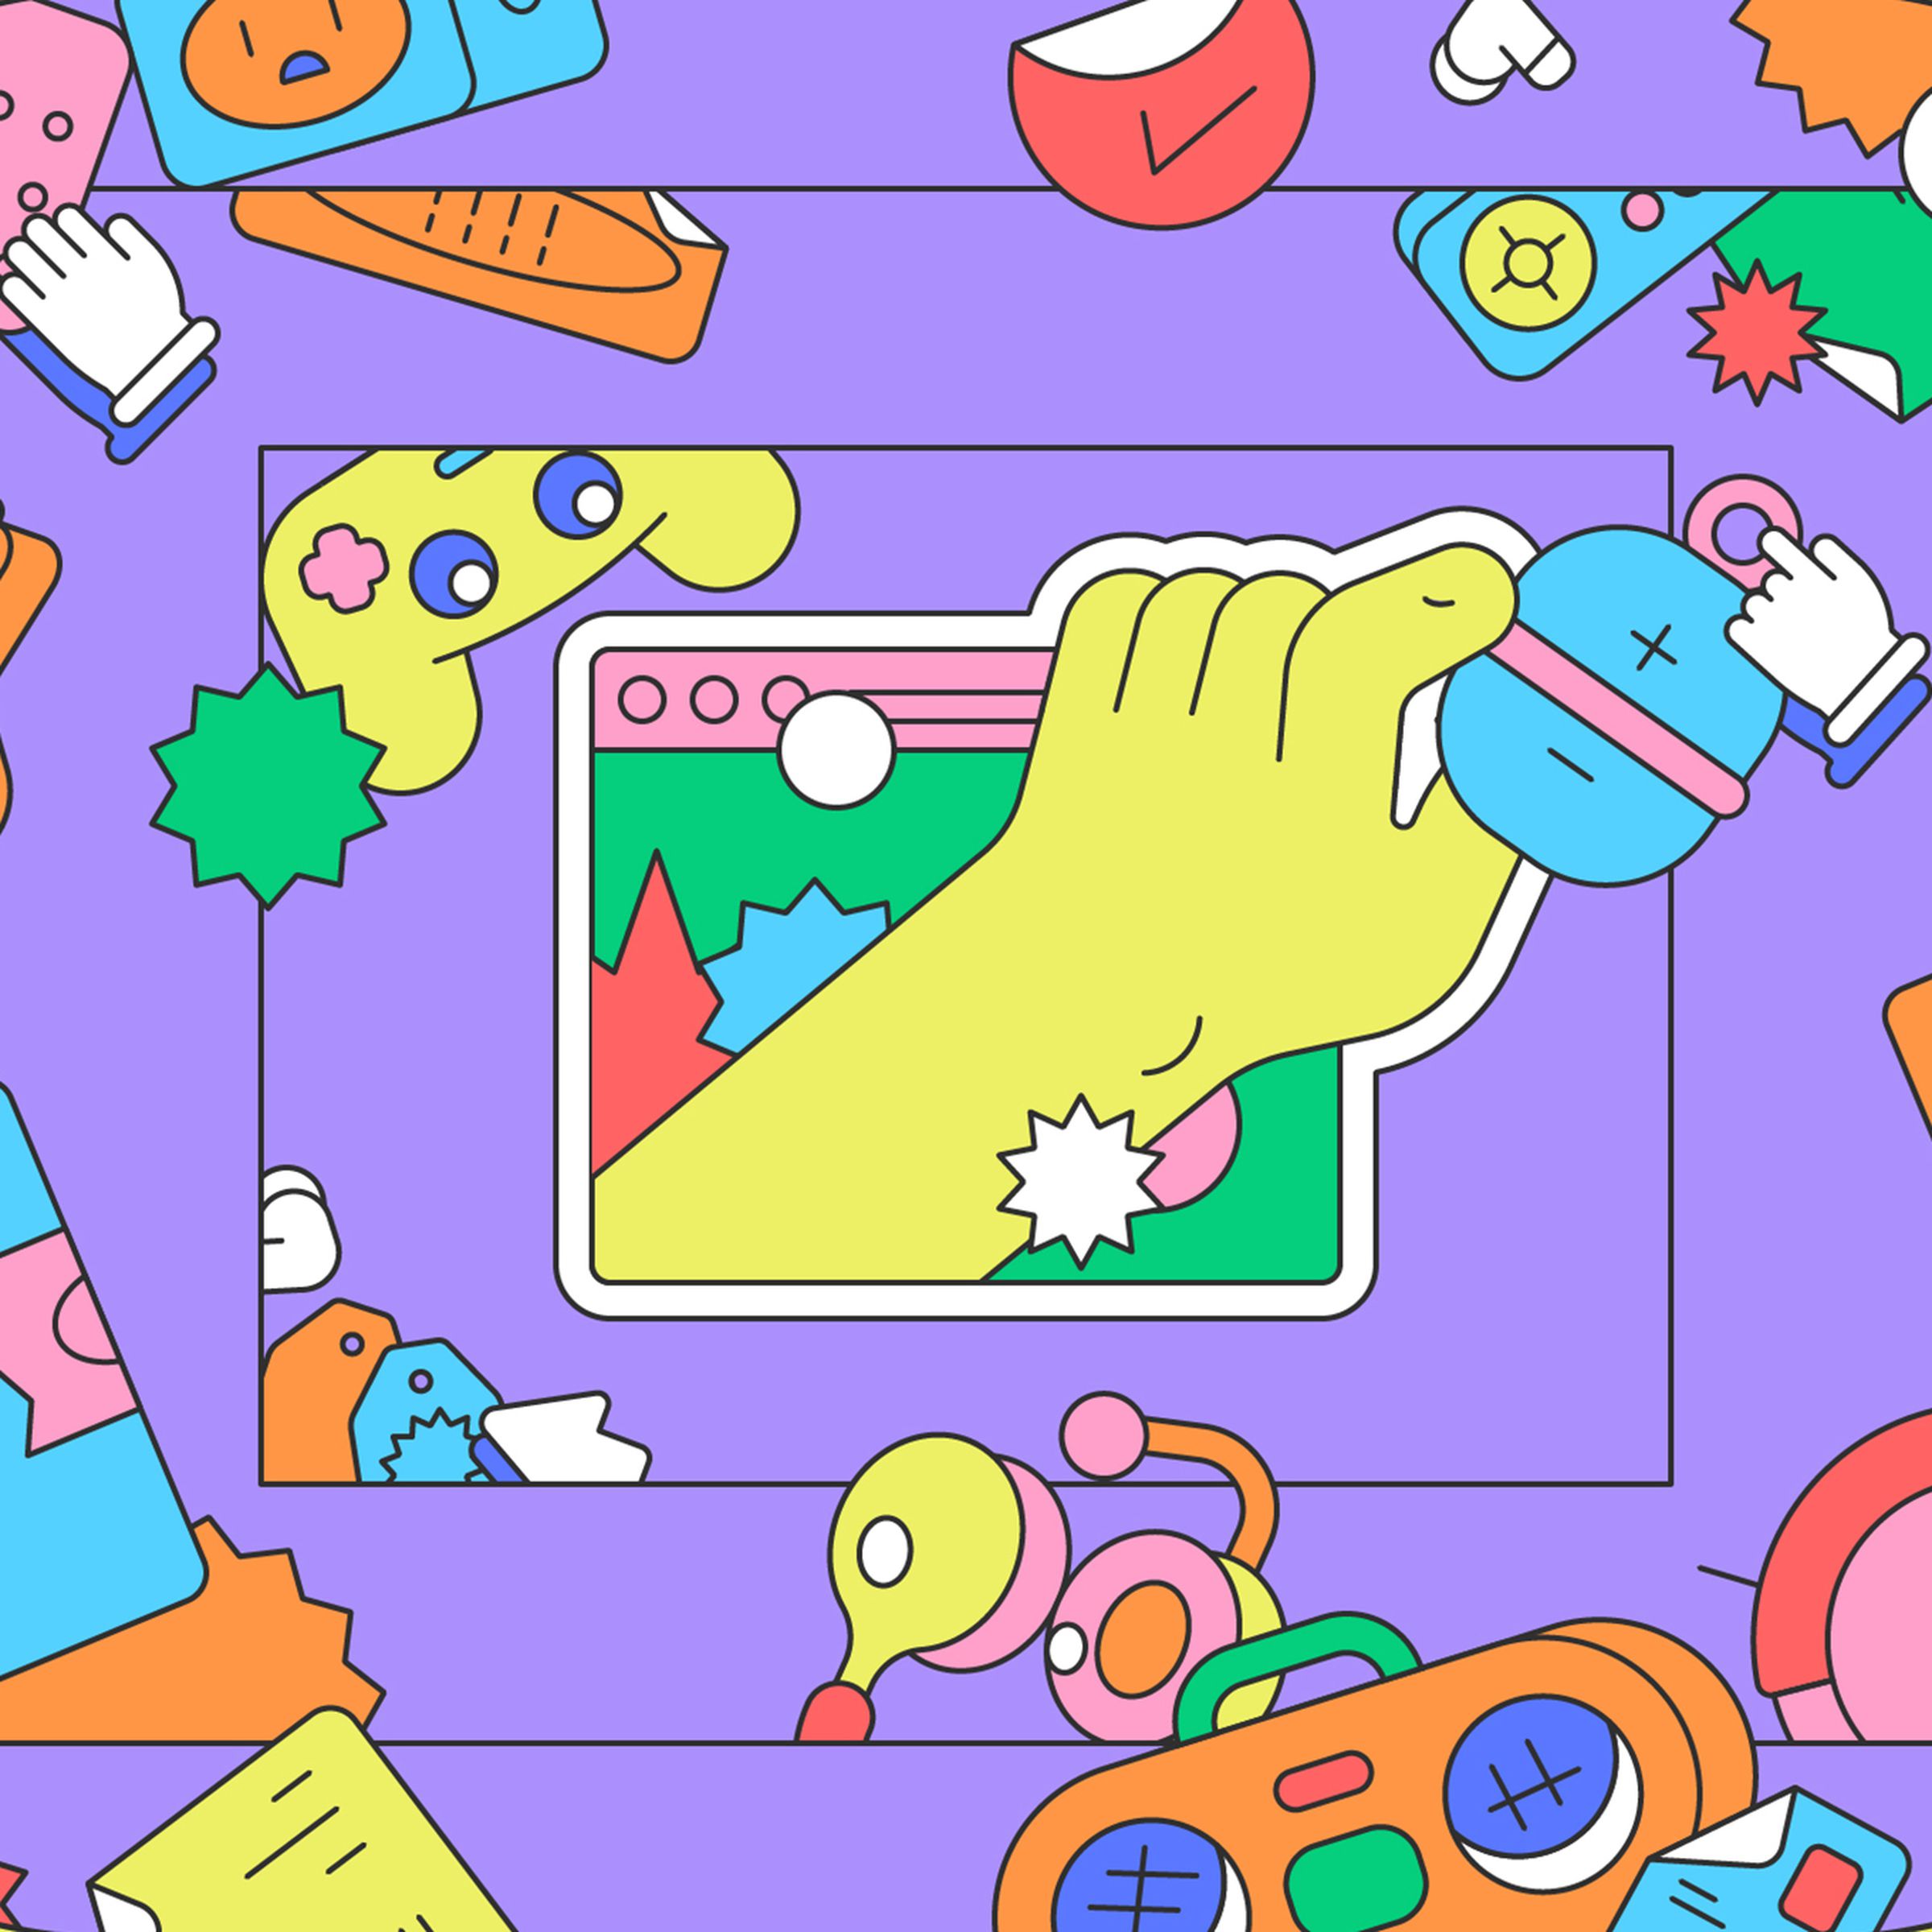 Brightly colored vector illustration of a hand grabbing a device from inside a browser window.